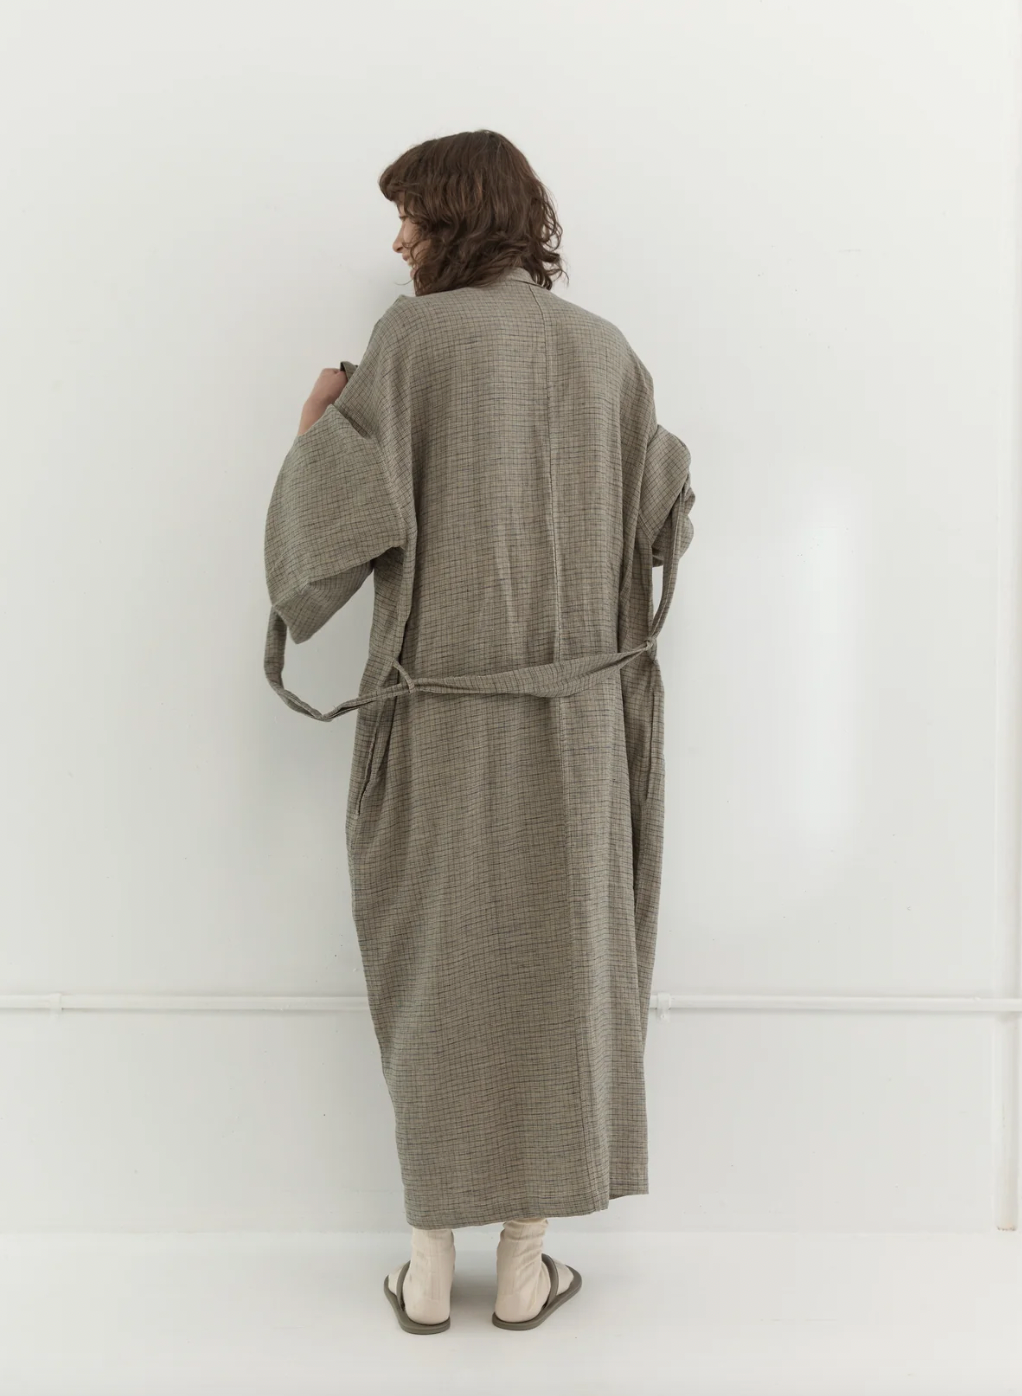 Product Image for The 02 Robe, Linen Check